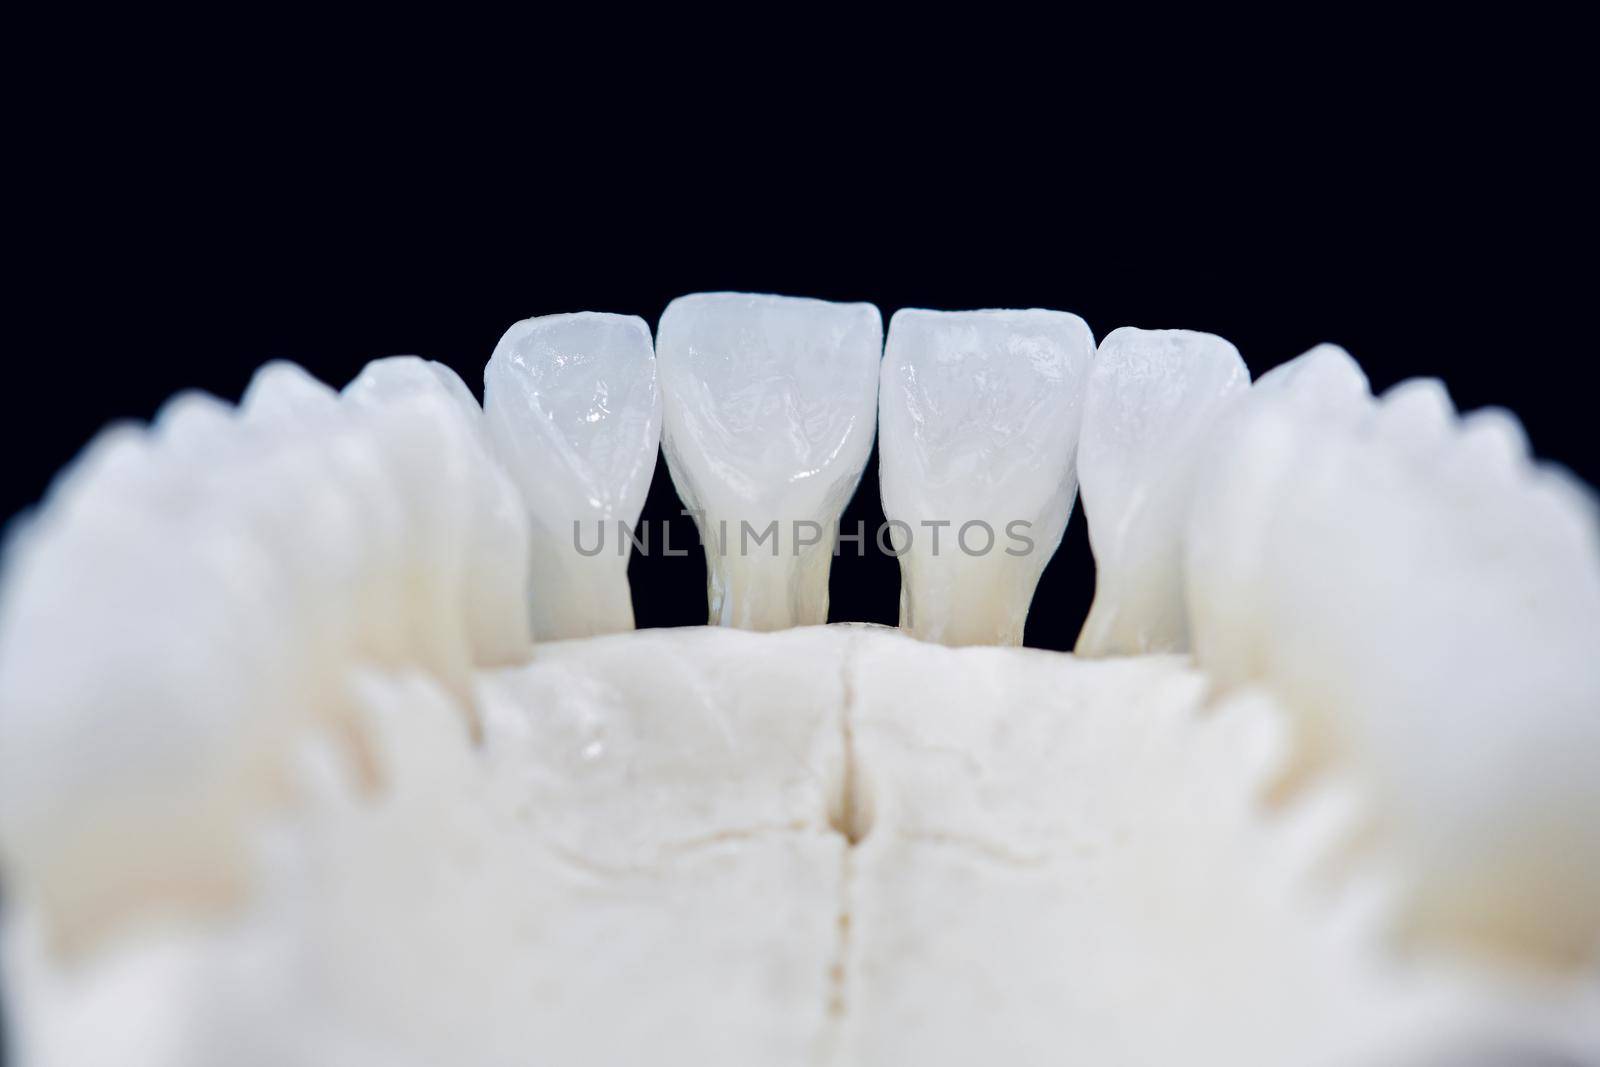 Lower human jaw with teeth anatomy model medical illustration isolated on black background. Healthy teeth, dental care and orthodontic concept